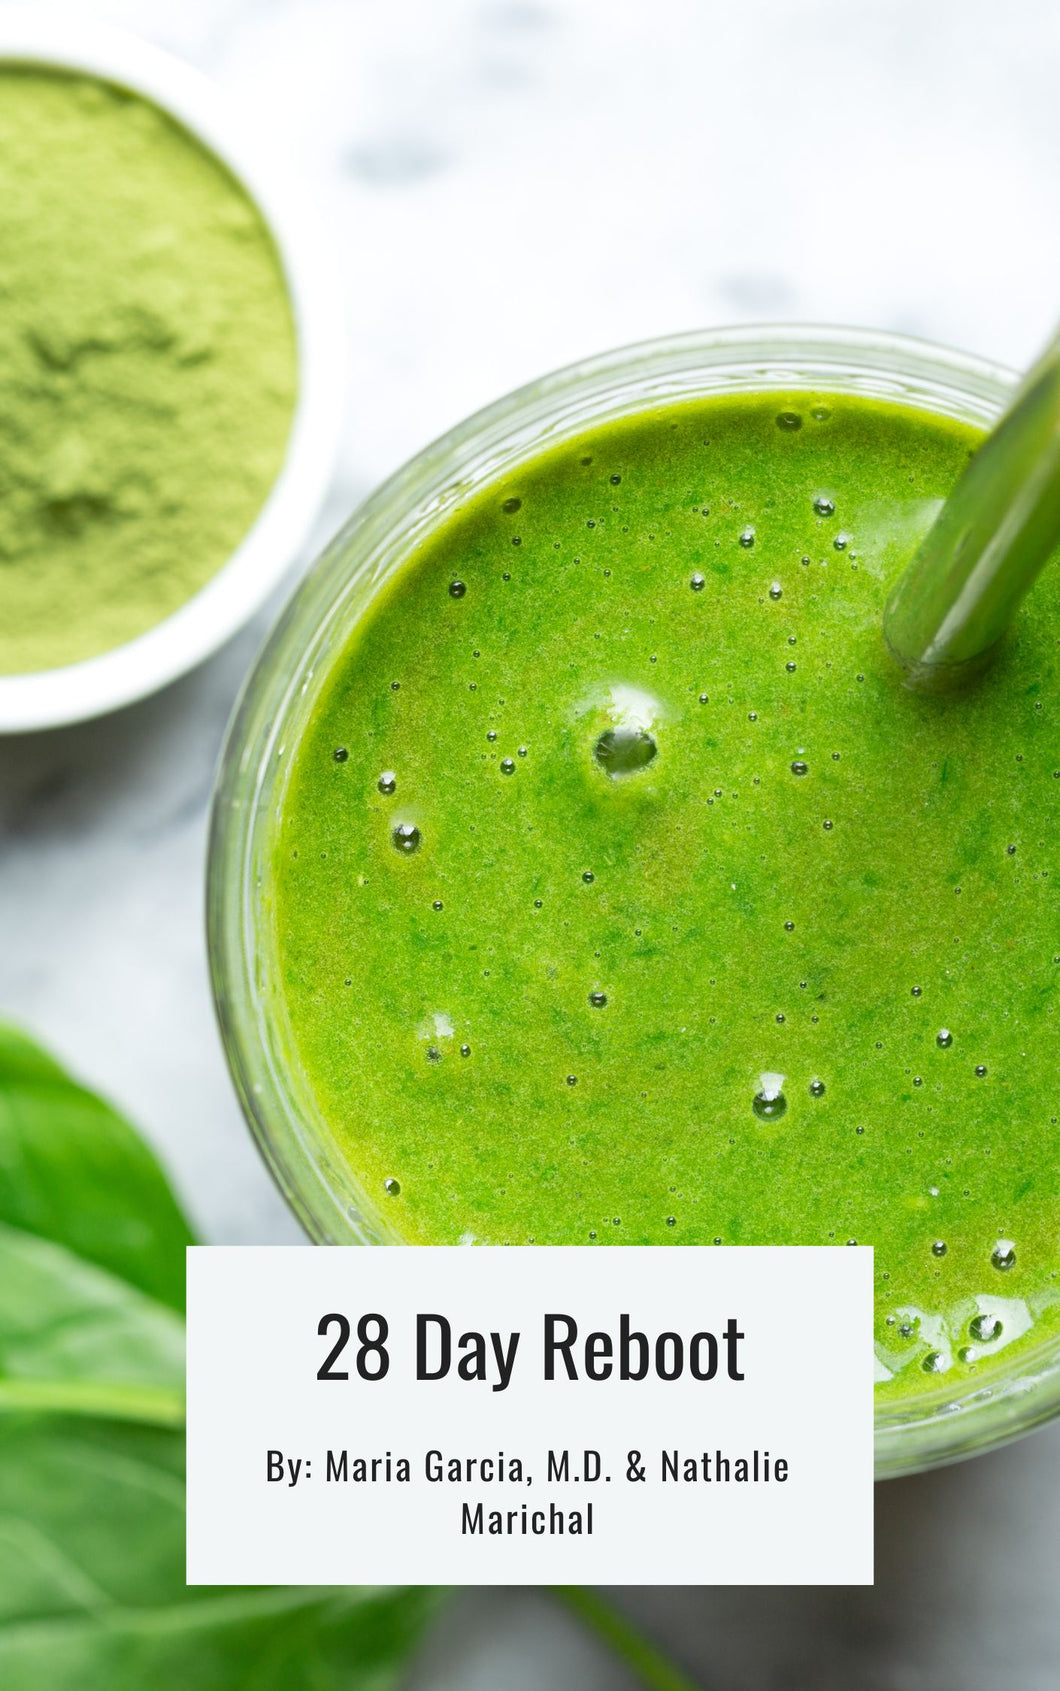 28 Day Reboot